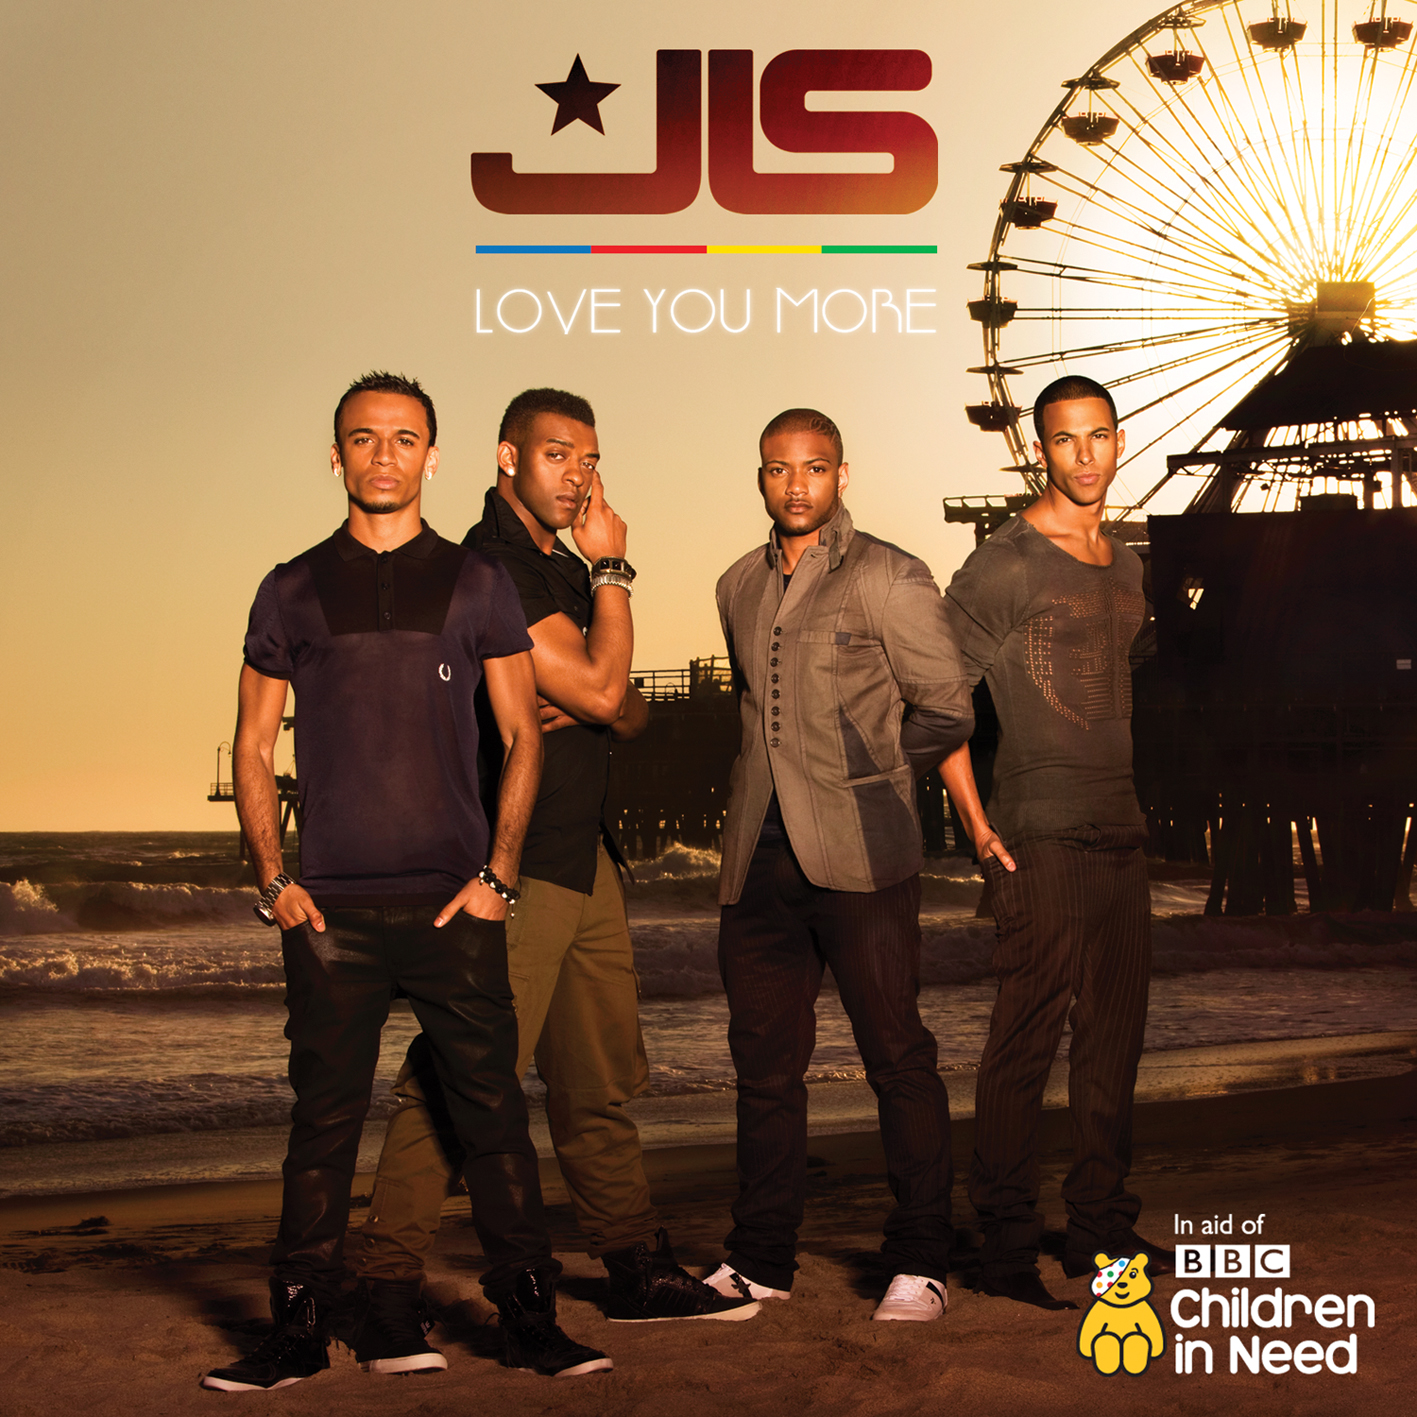 JLS announce new Children In Need charity single